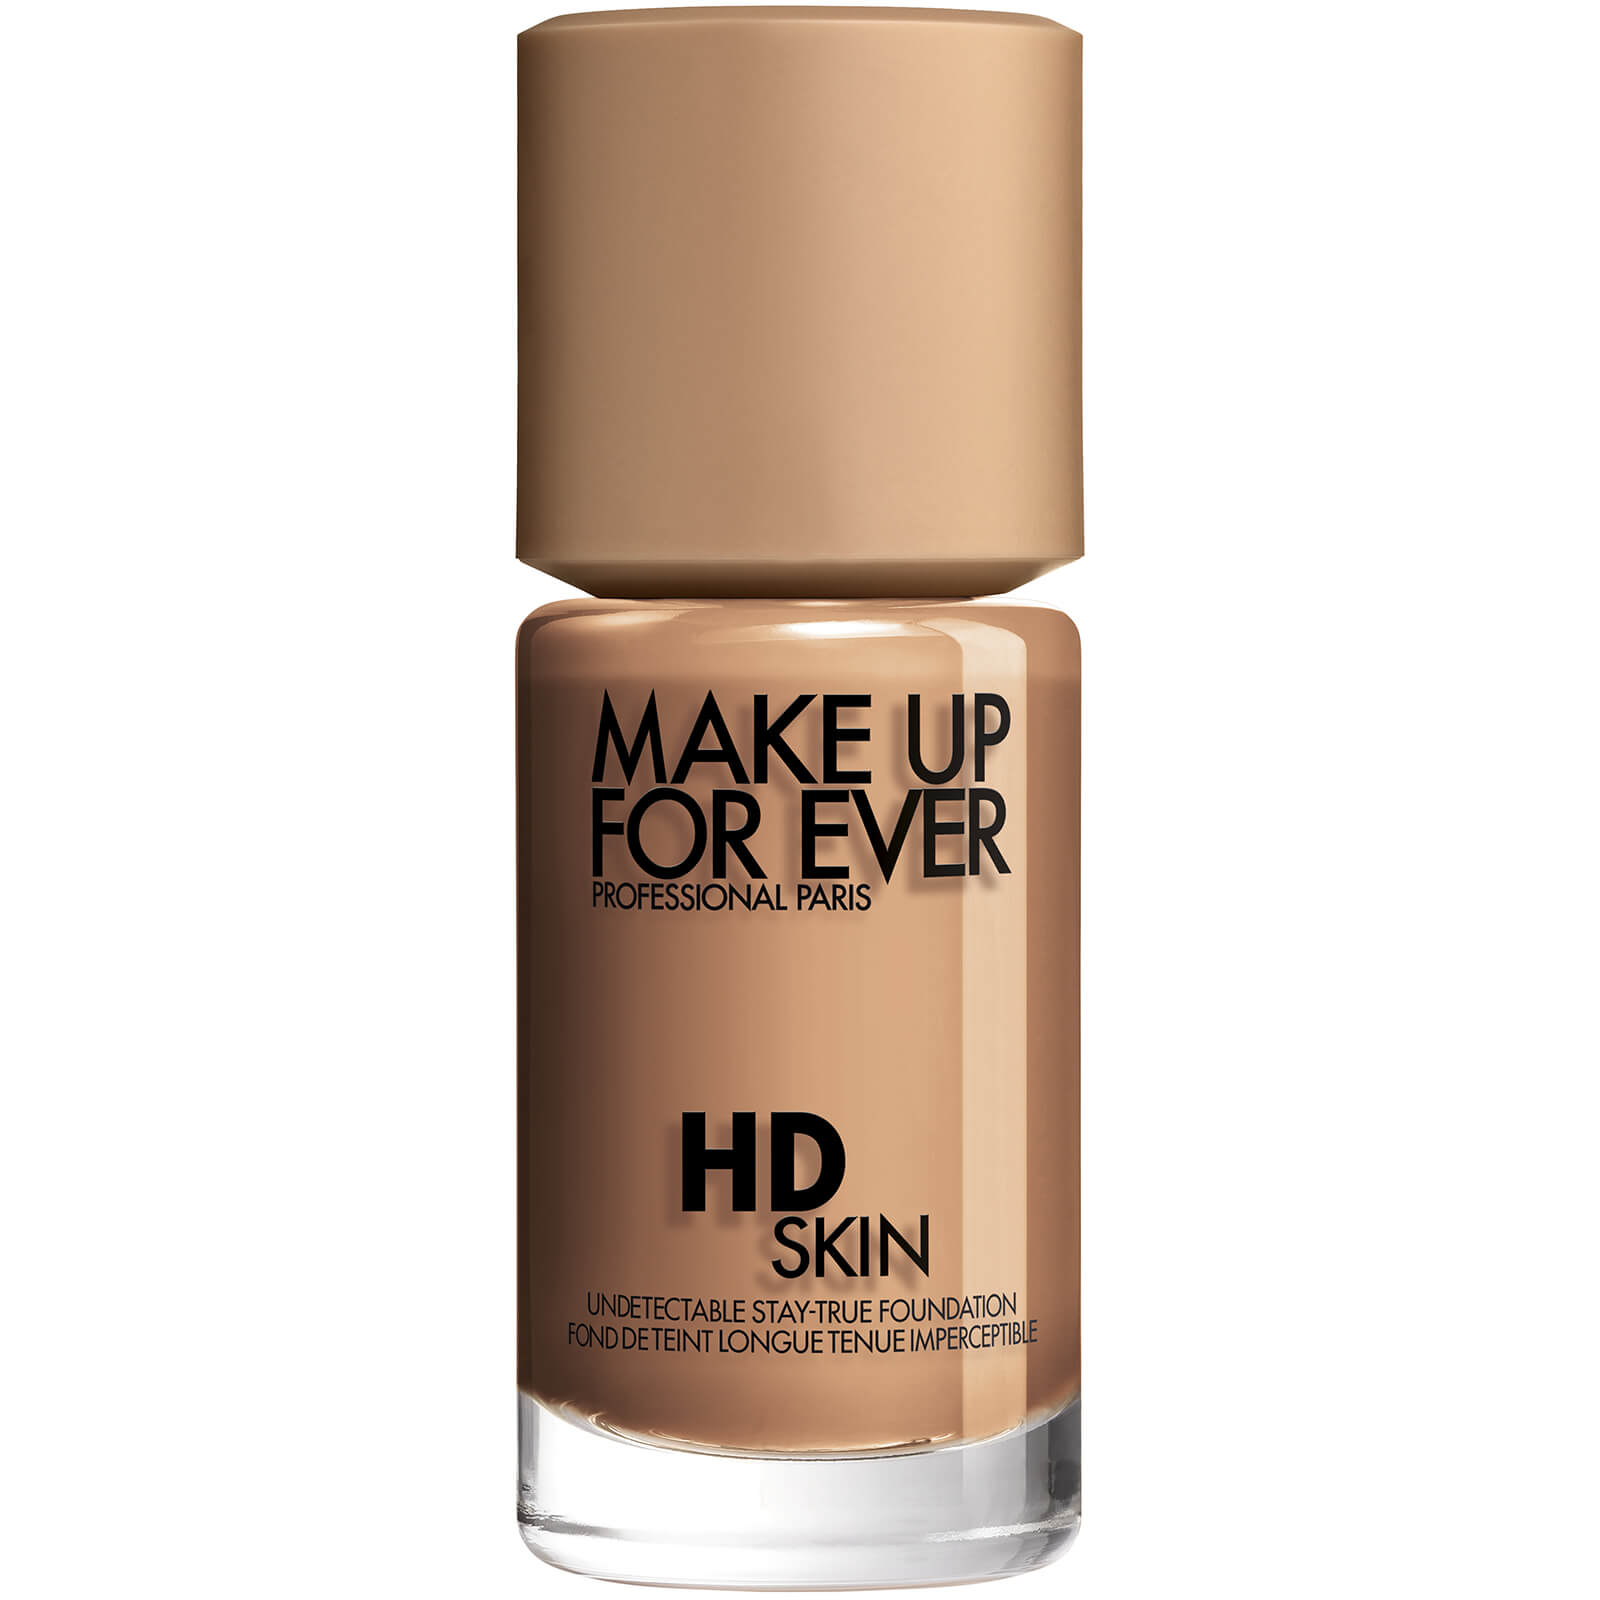 Make Up For Ever HD Skin Foundation 30ml (Various Shades) - 3R44 Cool Amber